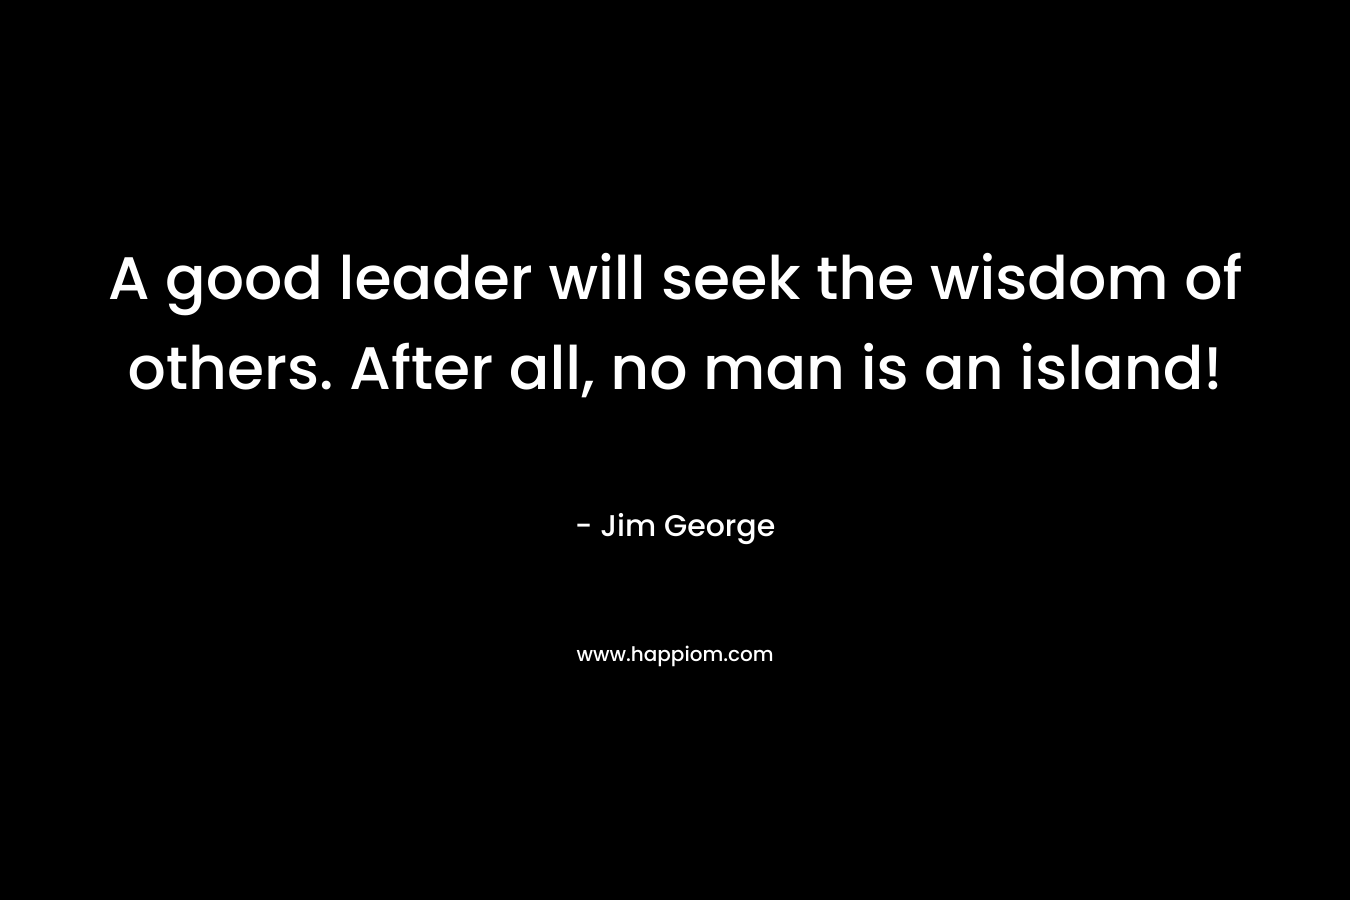 A good leader will seek the wisdom of others. After all, no man is an island!